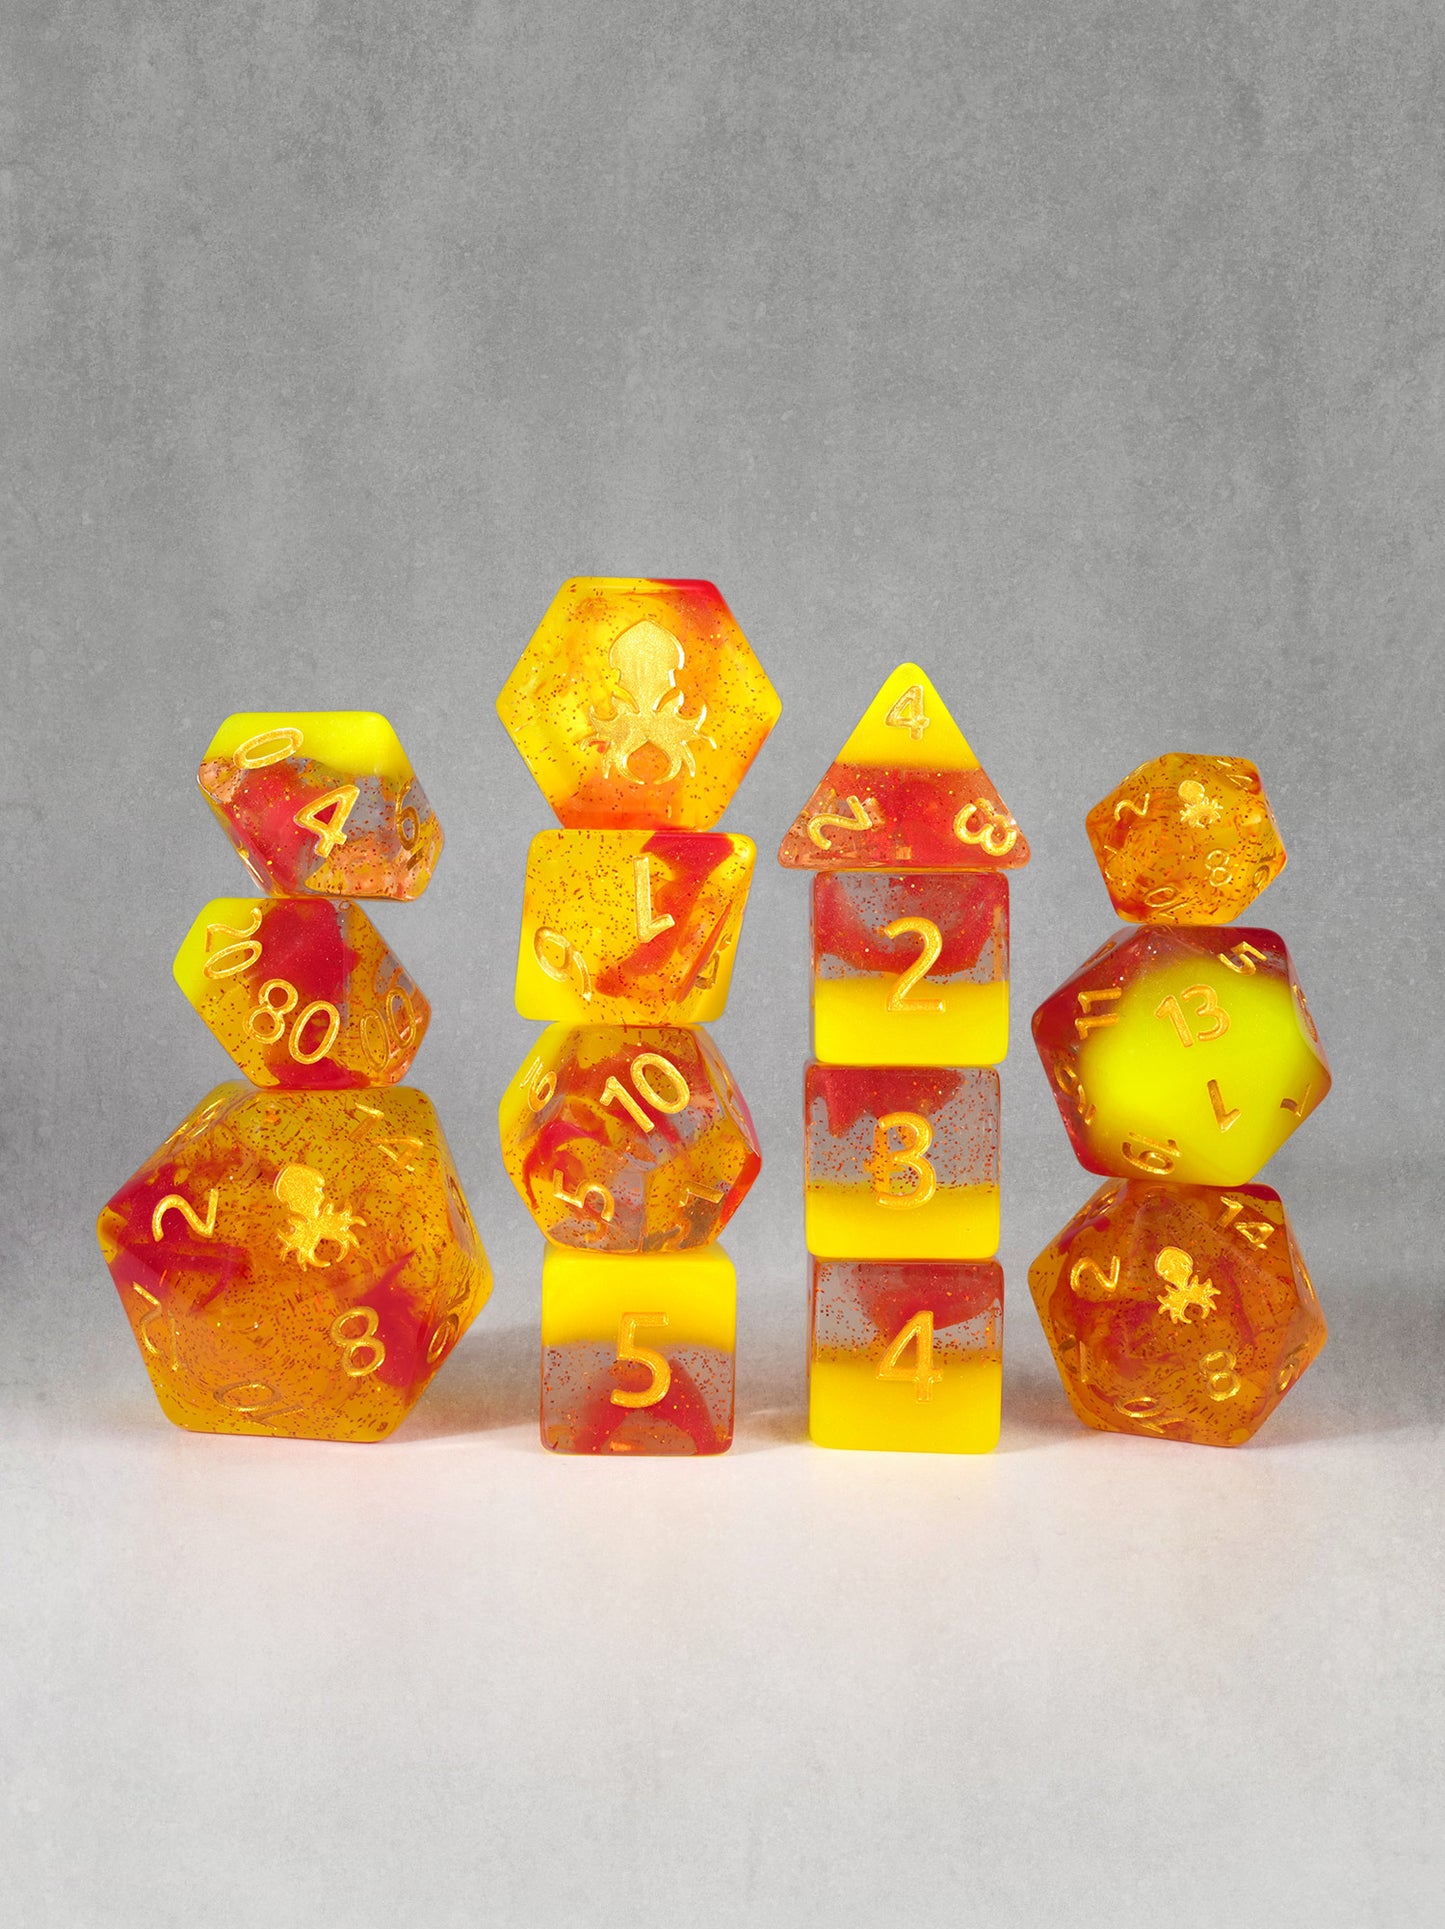 Magmaflow 2 14pc Glow in the Dark Dice Set inked in Gold